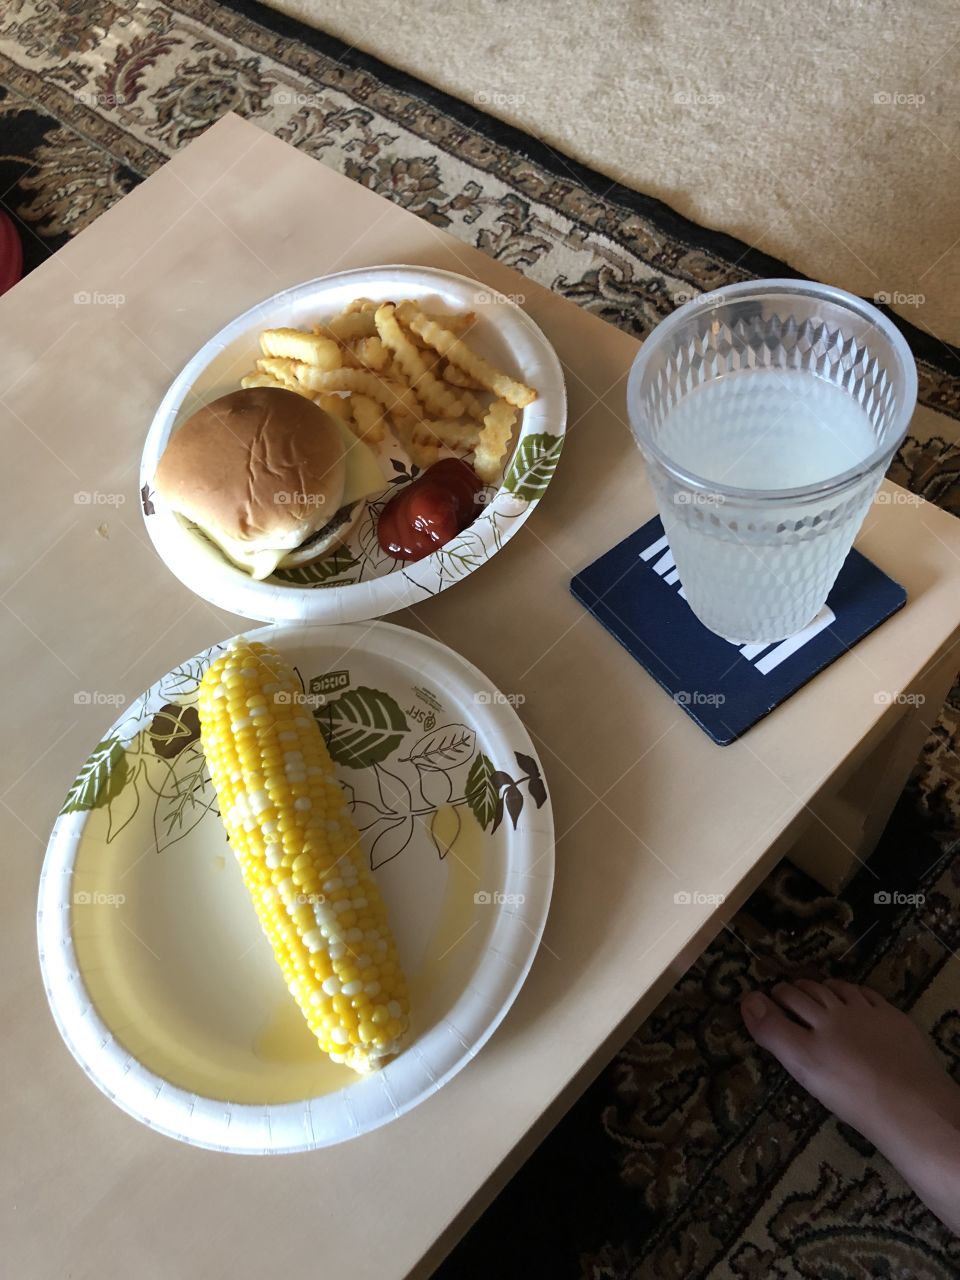 A summer feast on paper plates with lemonade, corn on the cob, a burger, French fries, and ketchup